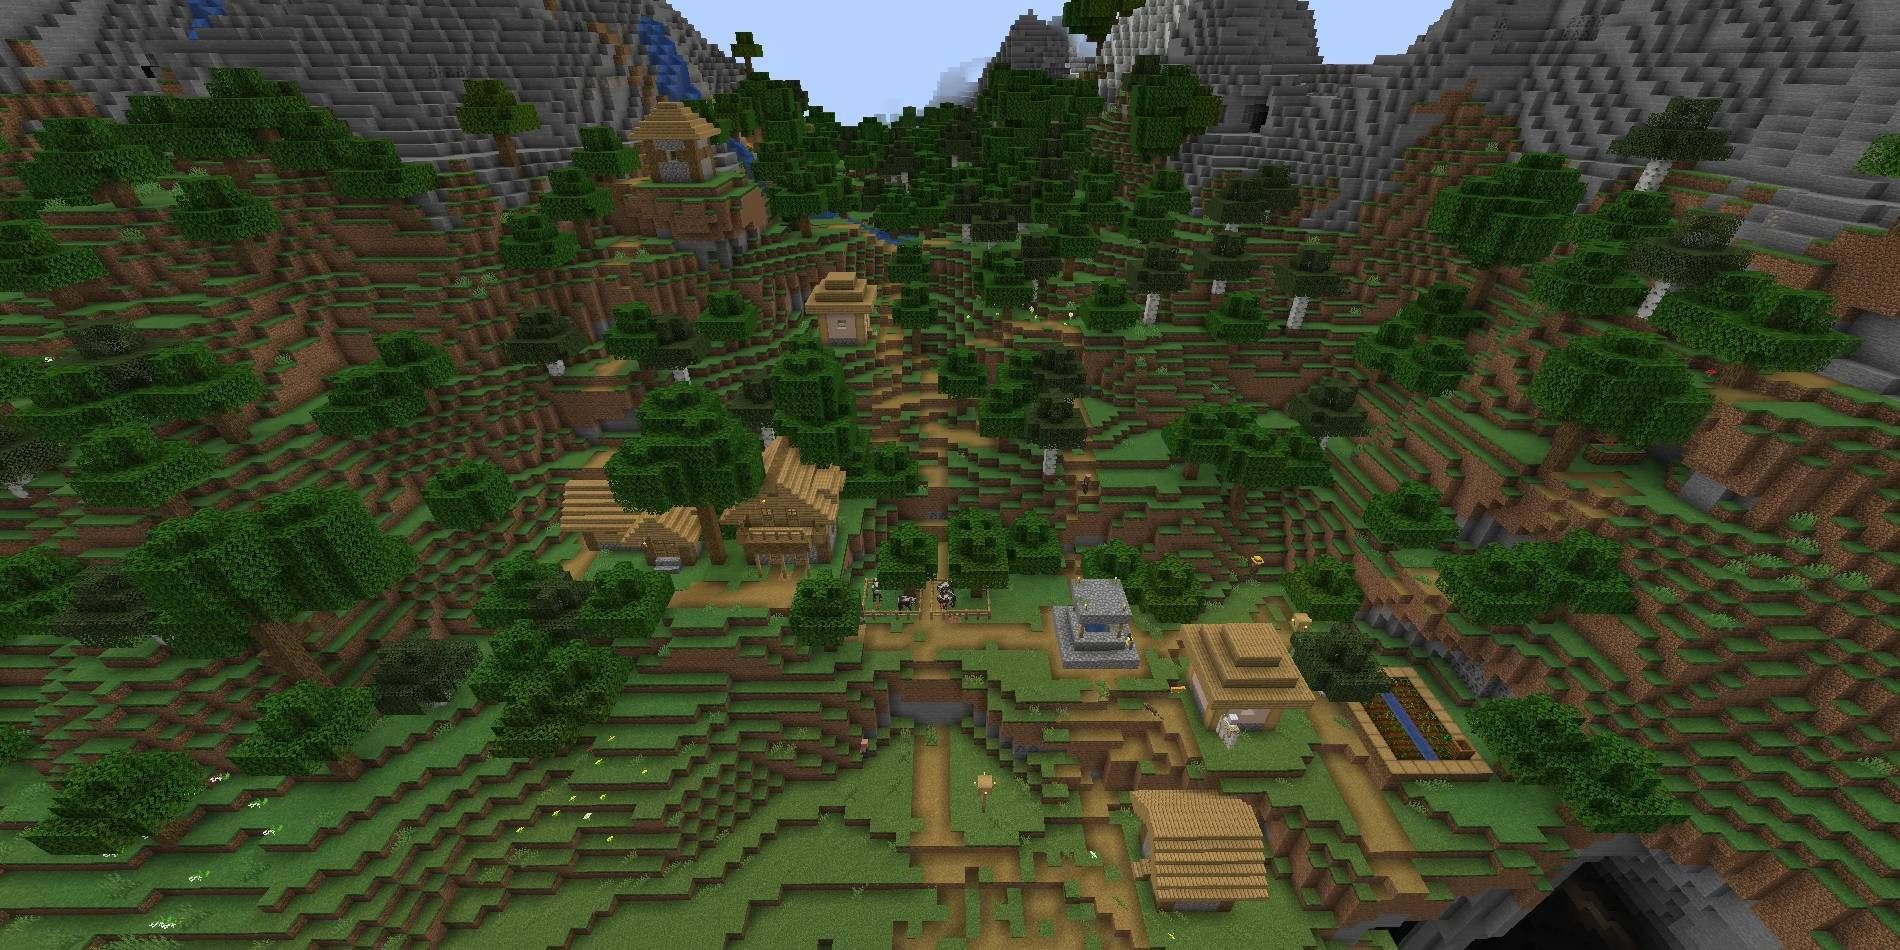 Minecraft 1.19 Seed Generation with Forest, Village, and Mountainous Region Biomes Preset